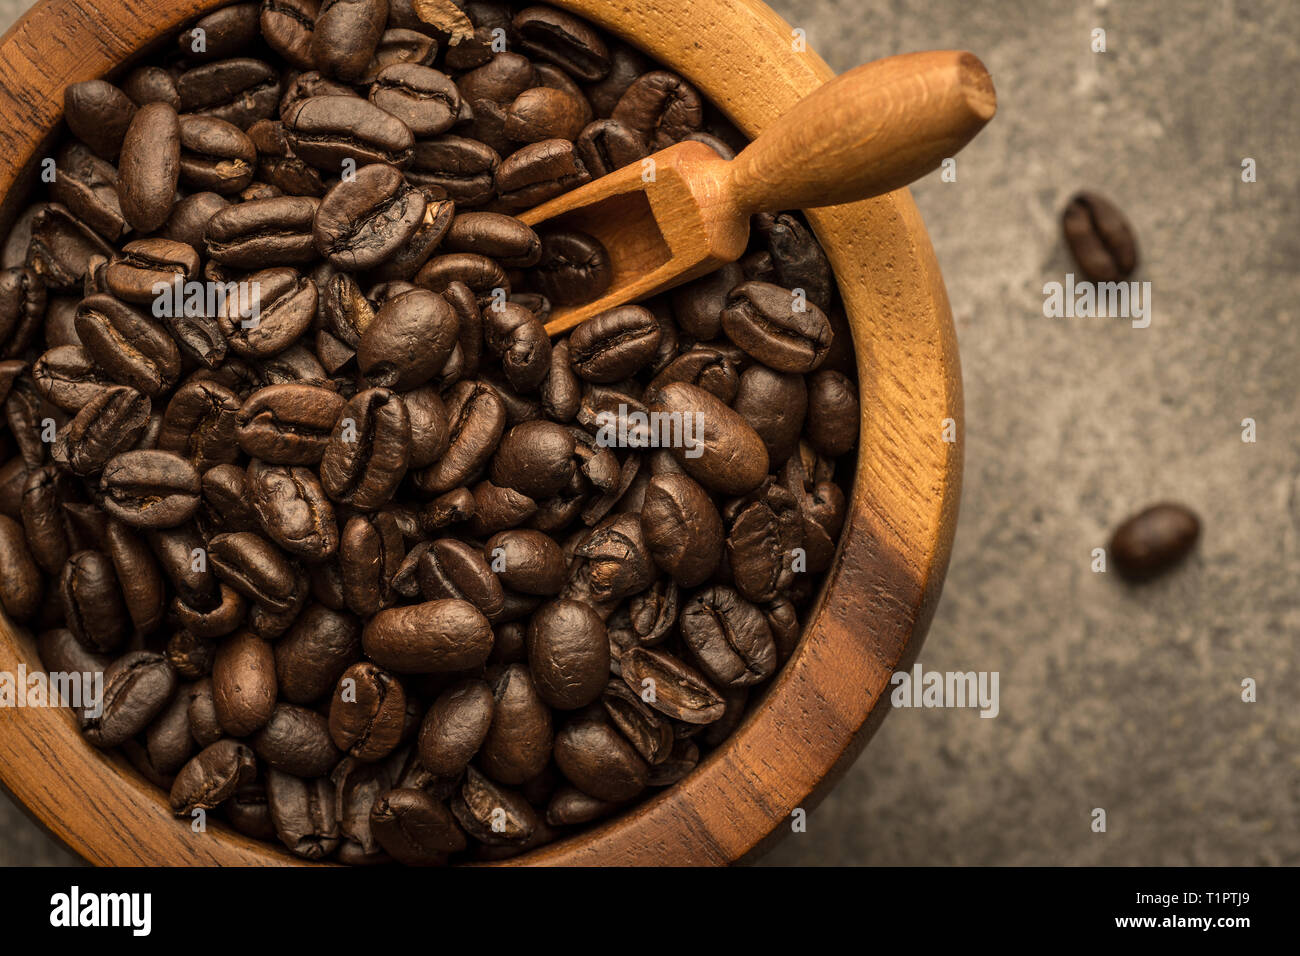 Coffee Beans in Wooden Bowl Stock Photo